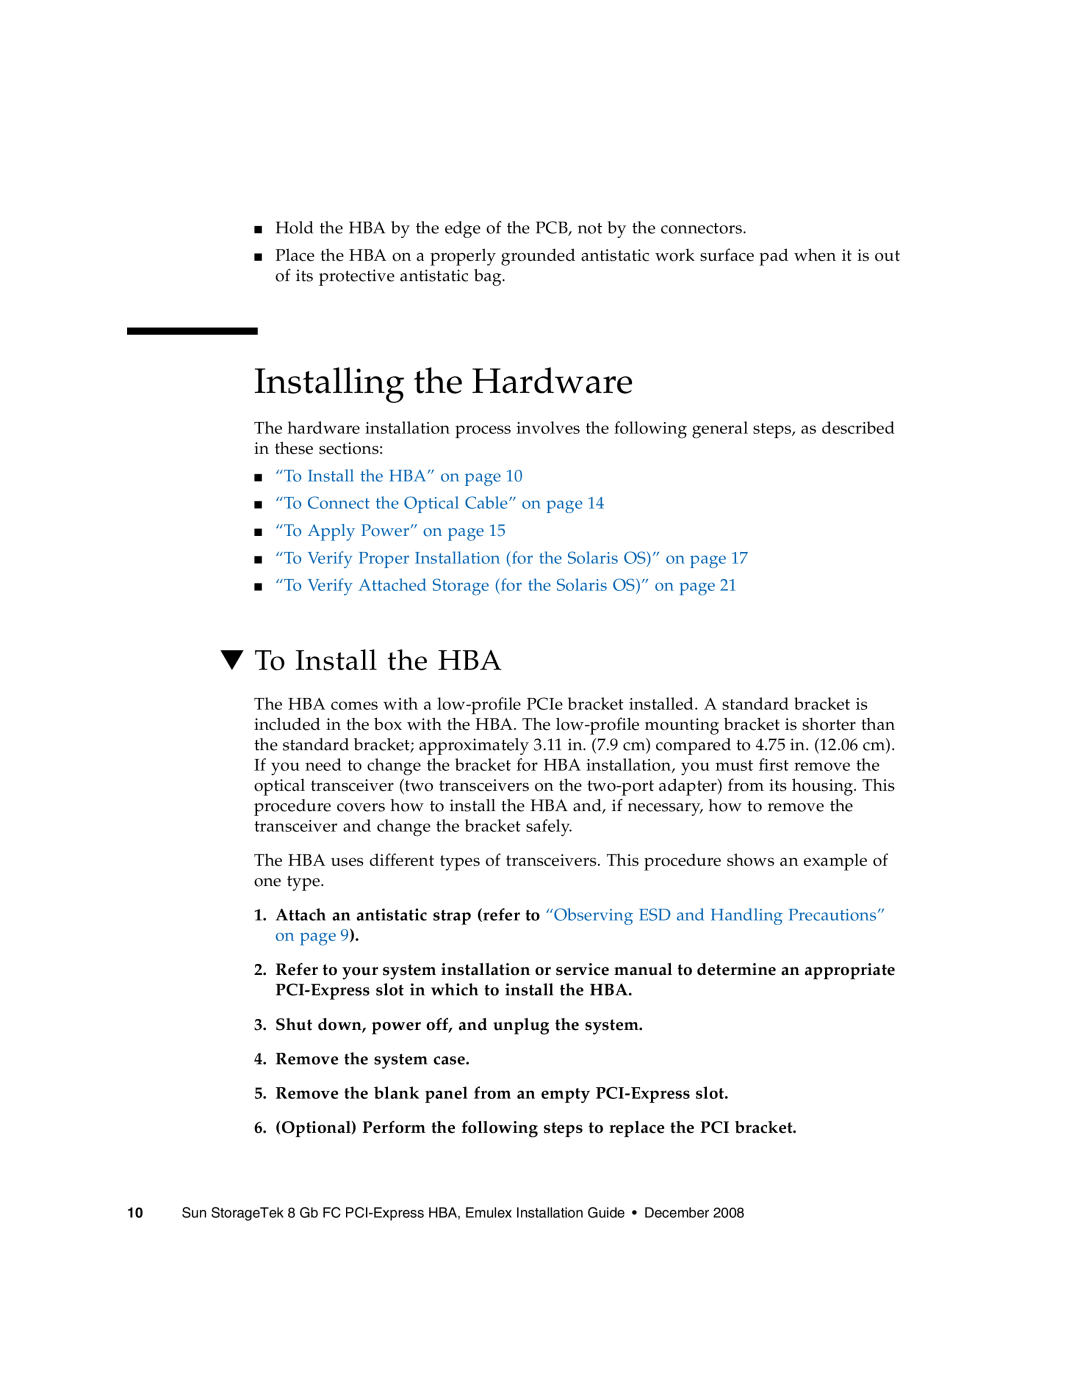 Sun Microsystems SG-XPCIE2FC-EM8-Z manual Installing the Hardware, To Install the HBA, “To Apply Power” on page 